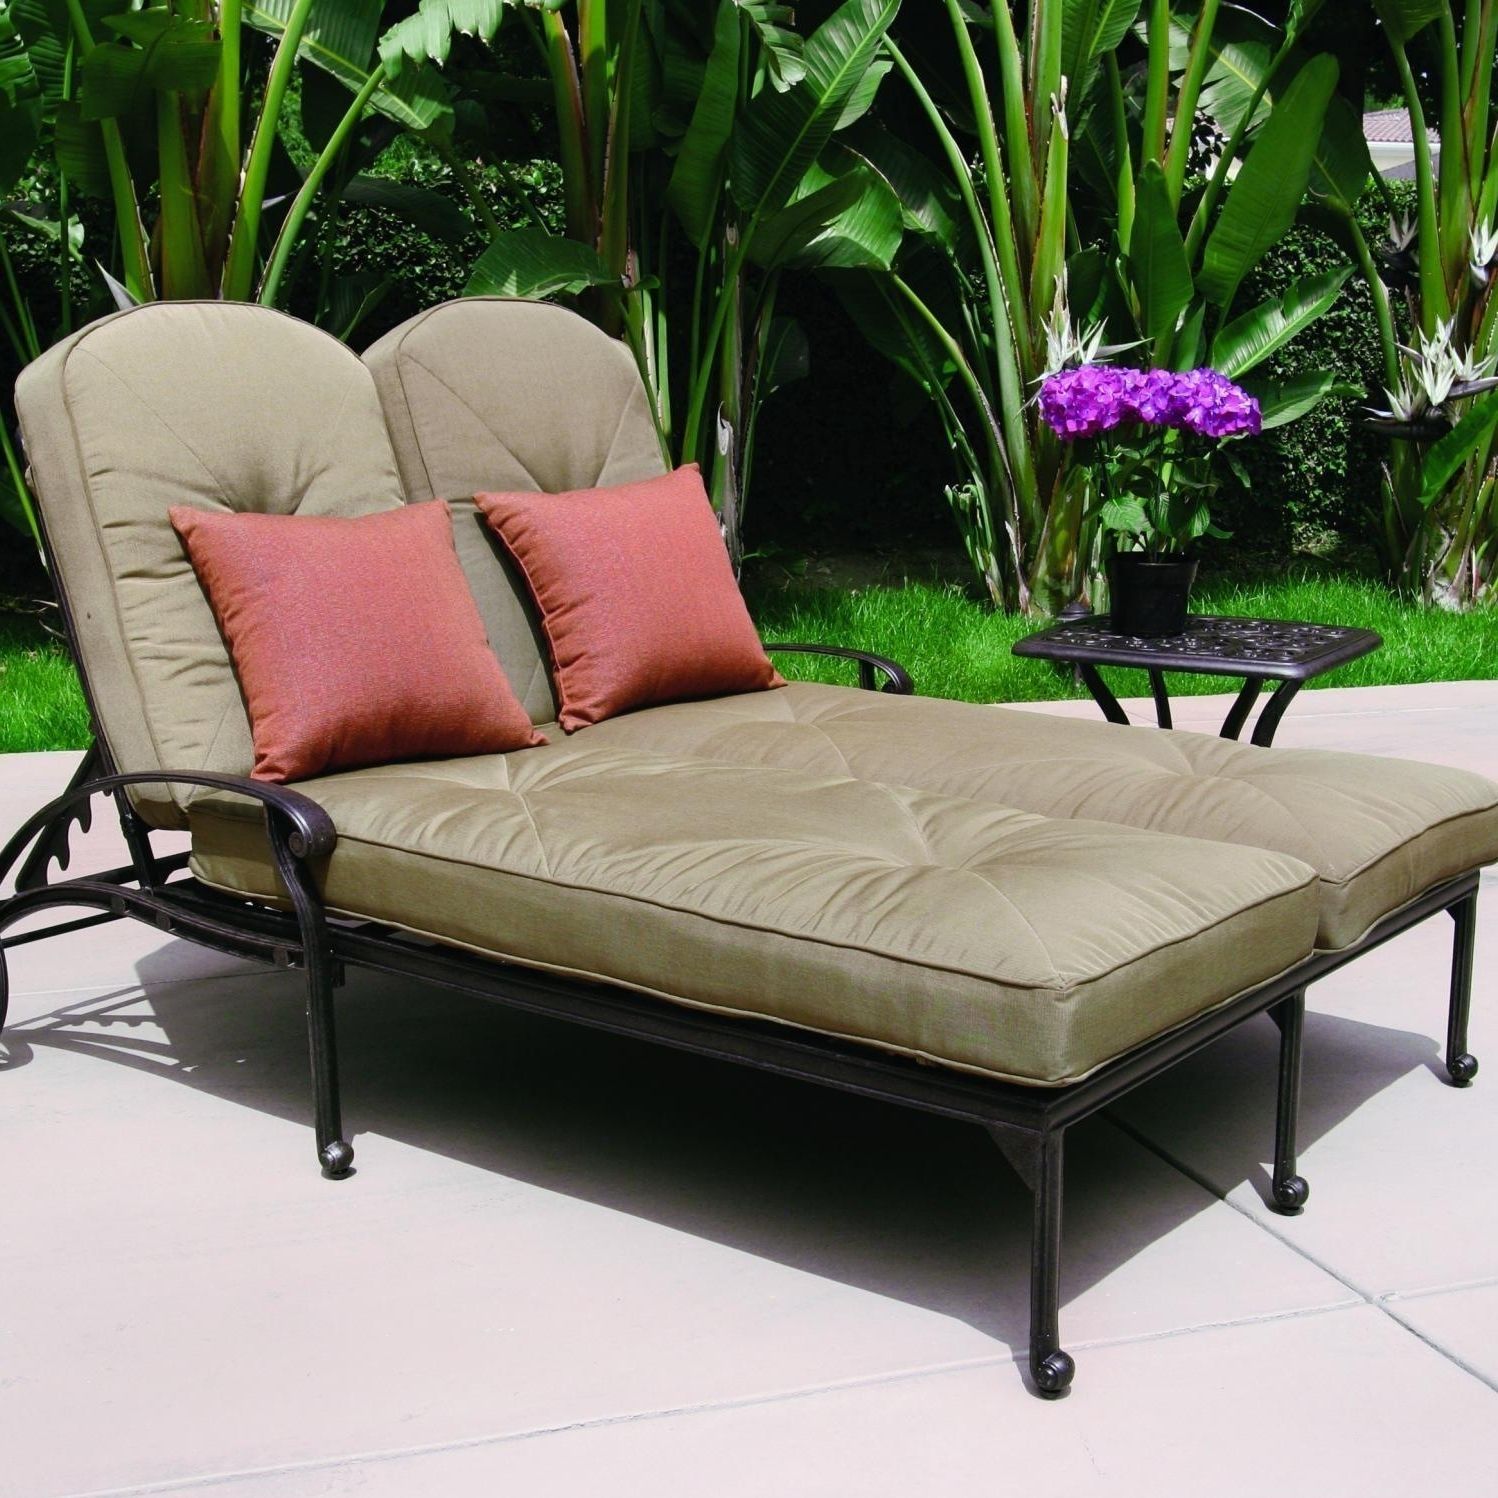 Darlee Elisabeth 2 Piece Cast Aluminum Patio Double Chaise Lounge Regarding Preferred Two Person Chaise Lounges (View 7 of 15)